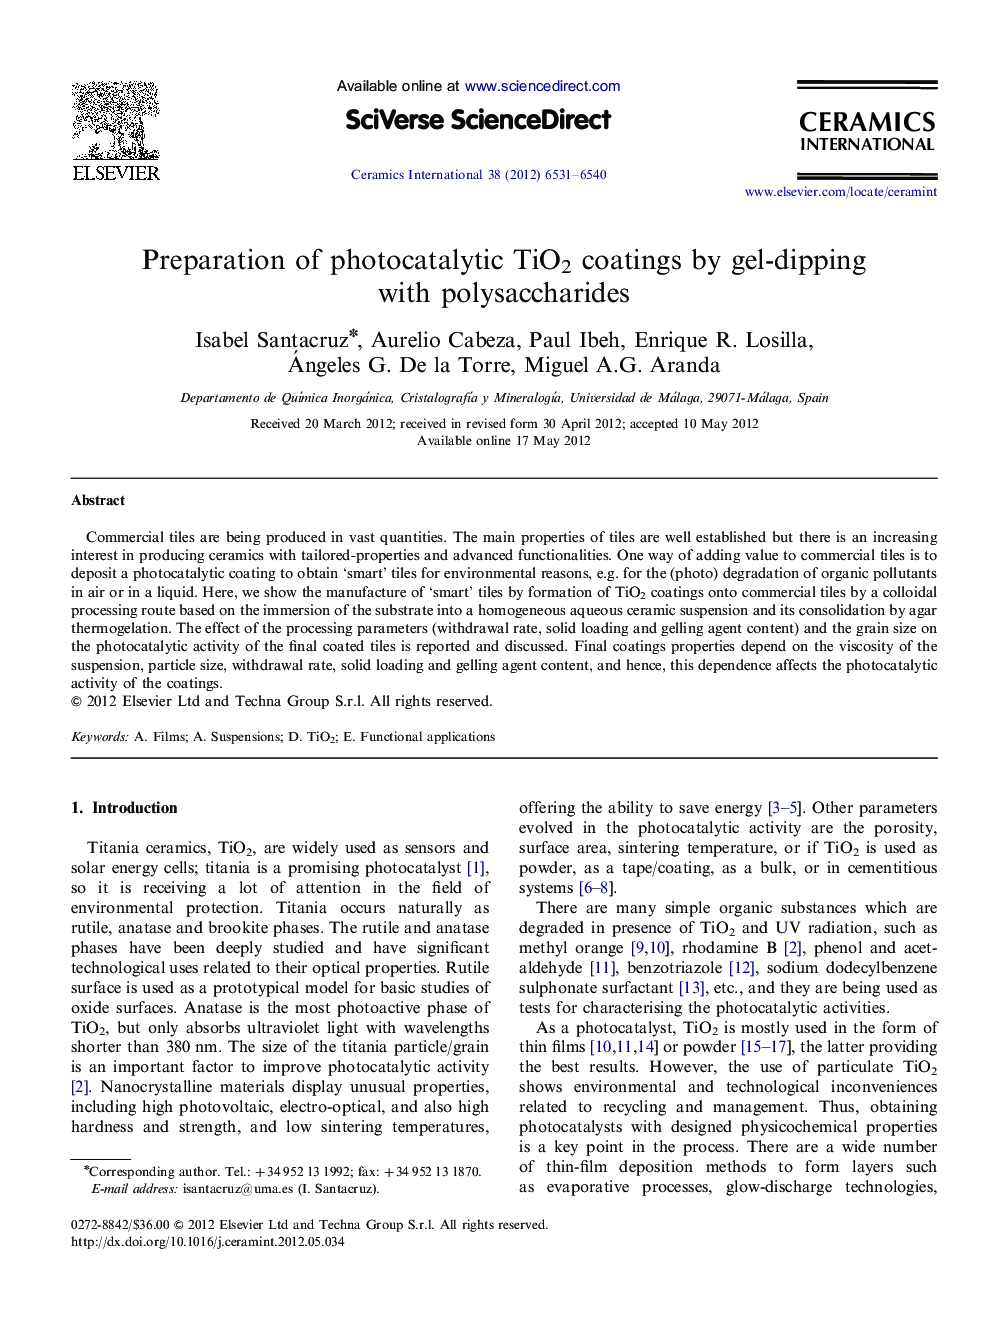 Preparation of photocatalytic TiO2 coatings by gel-dipping with polysaccharides